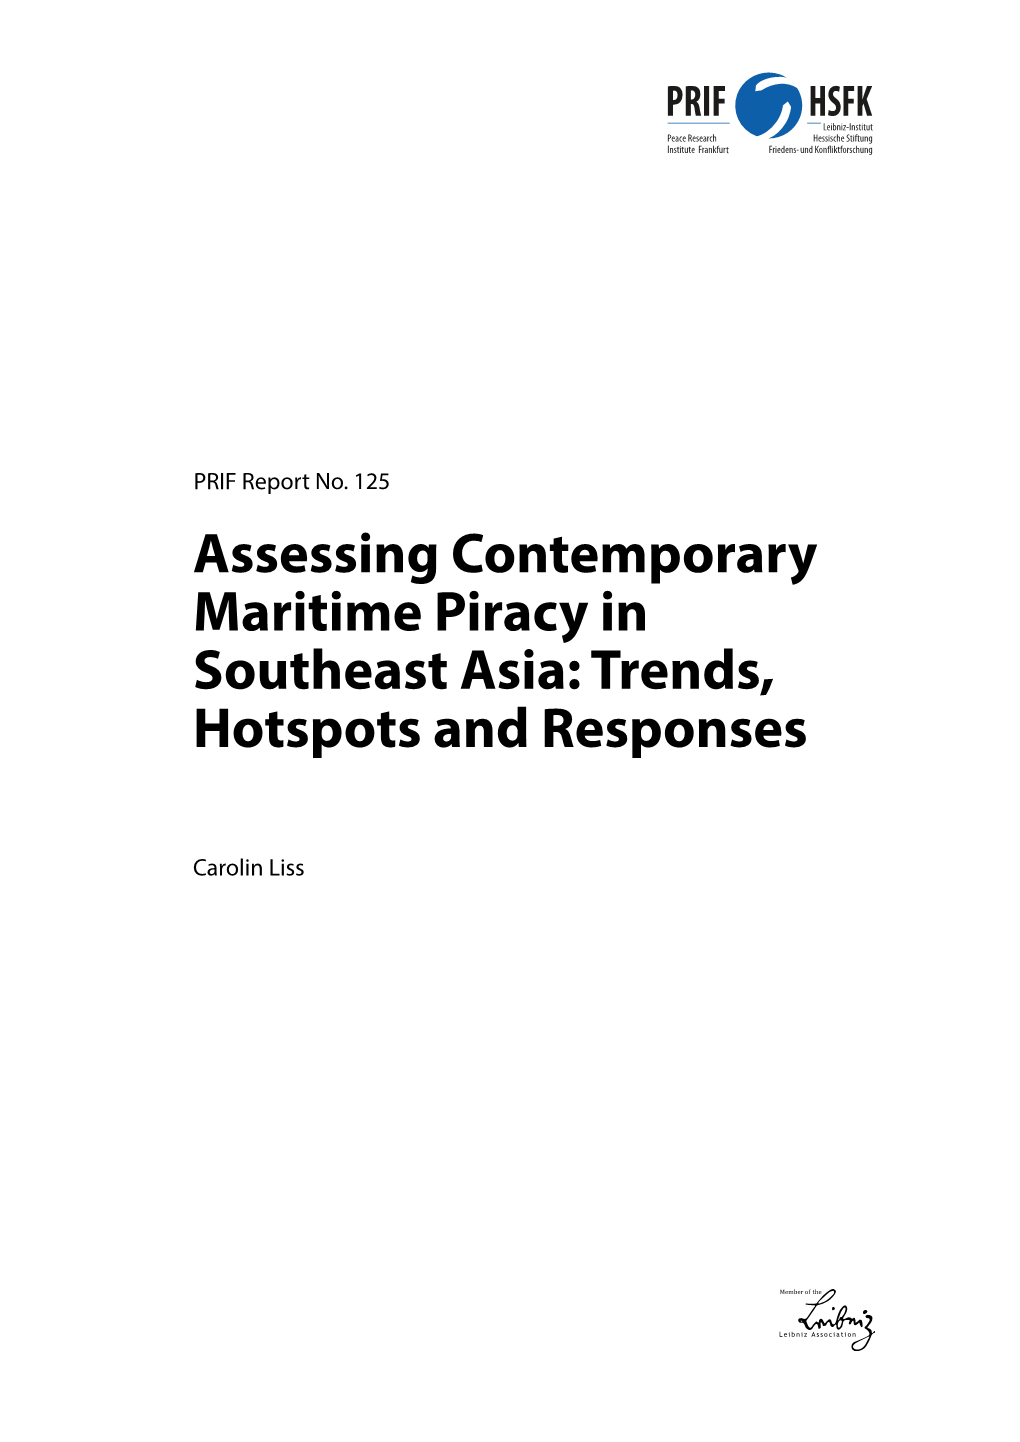 Assessing Contemporary Maritime Piracy in Southeast Asia: Trends, Hotspots and Responses